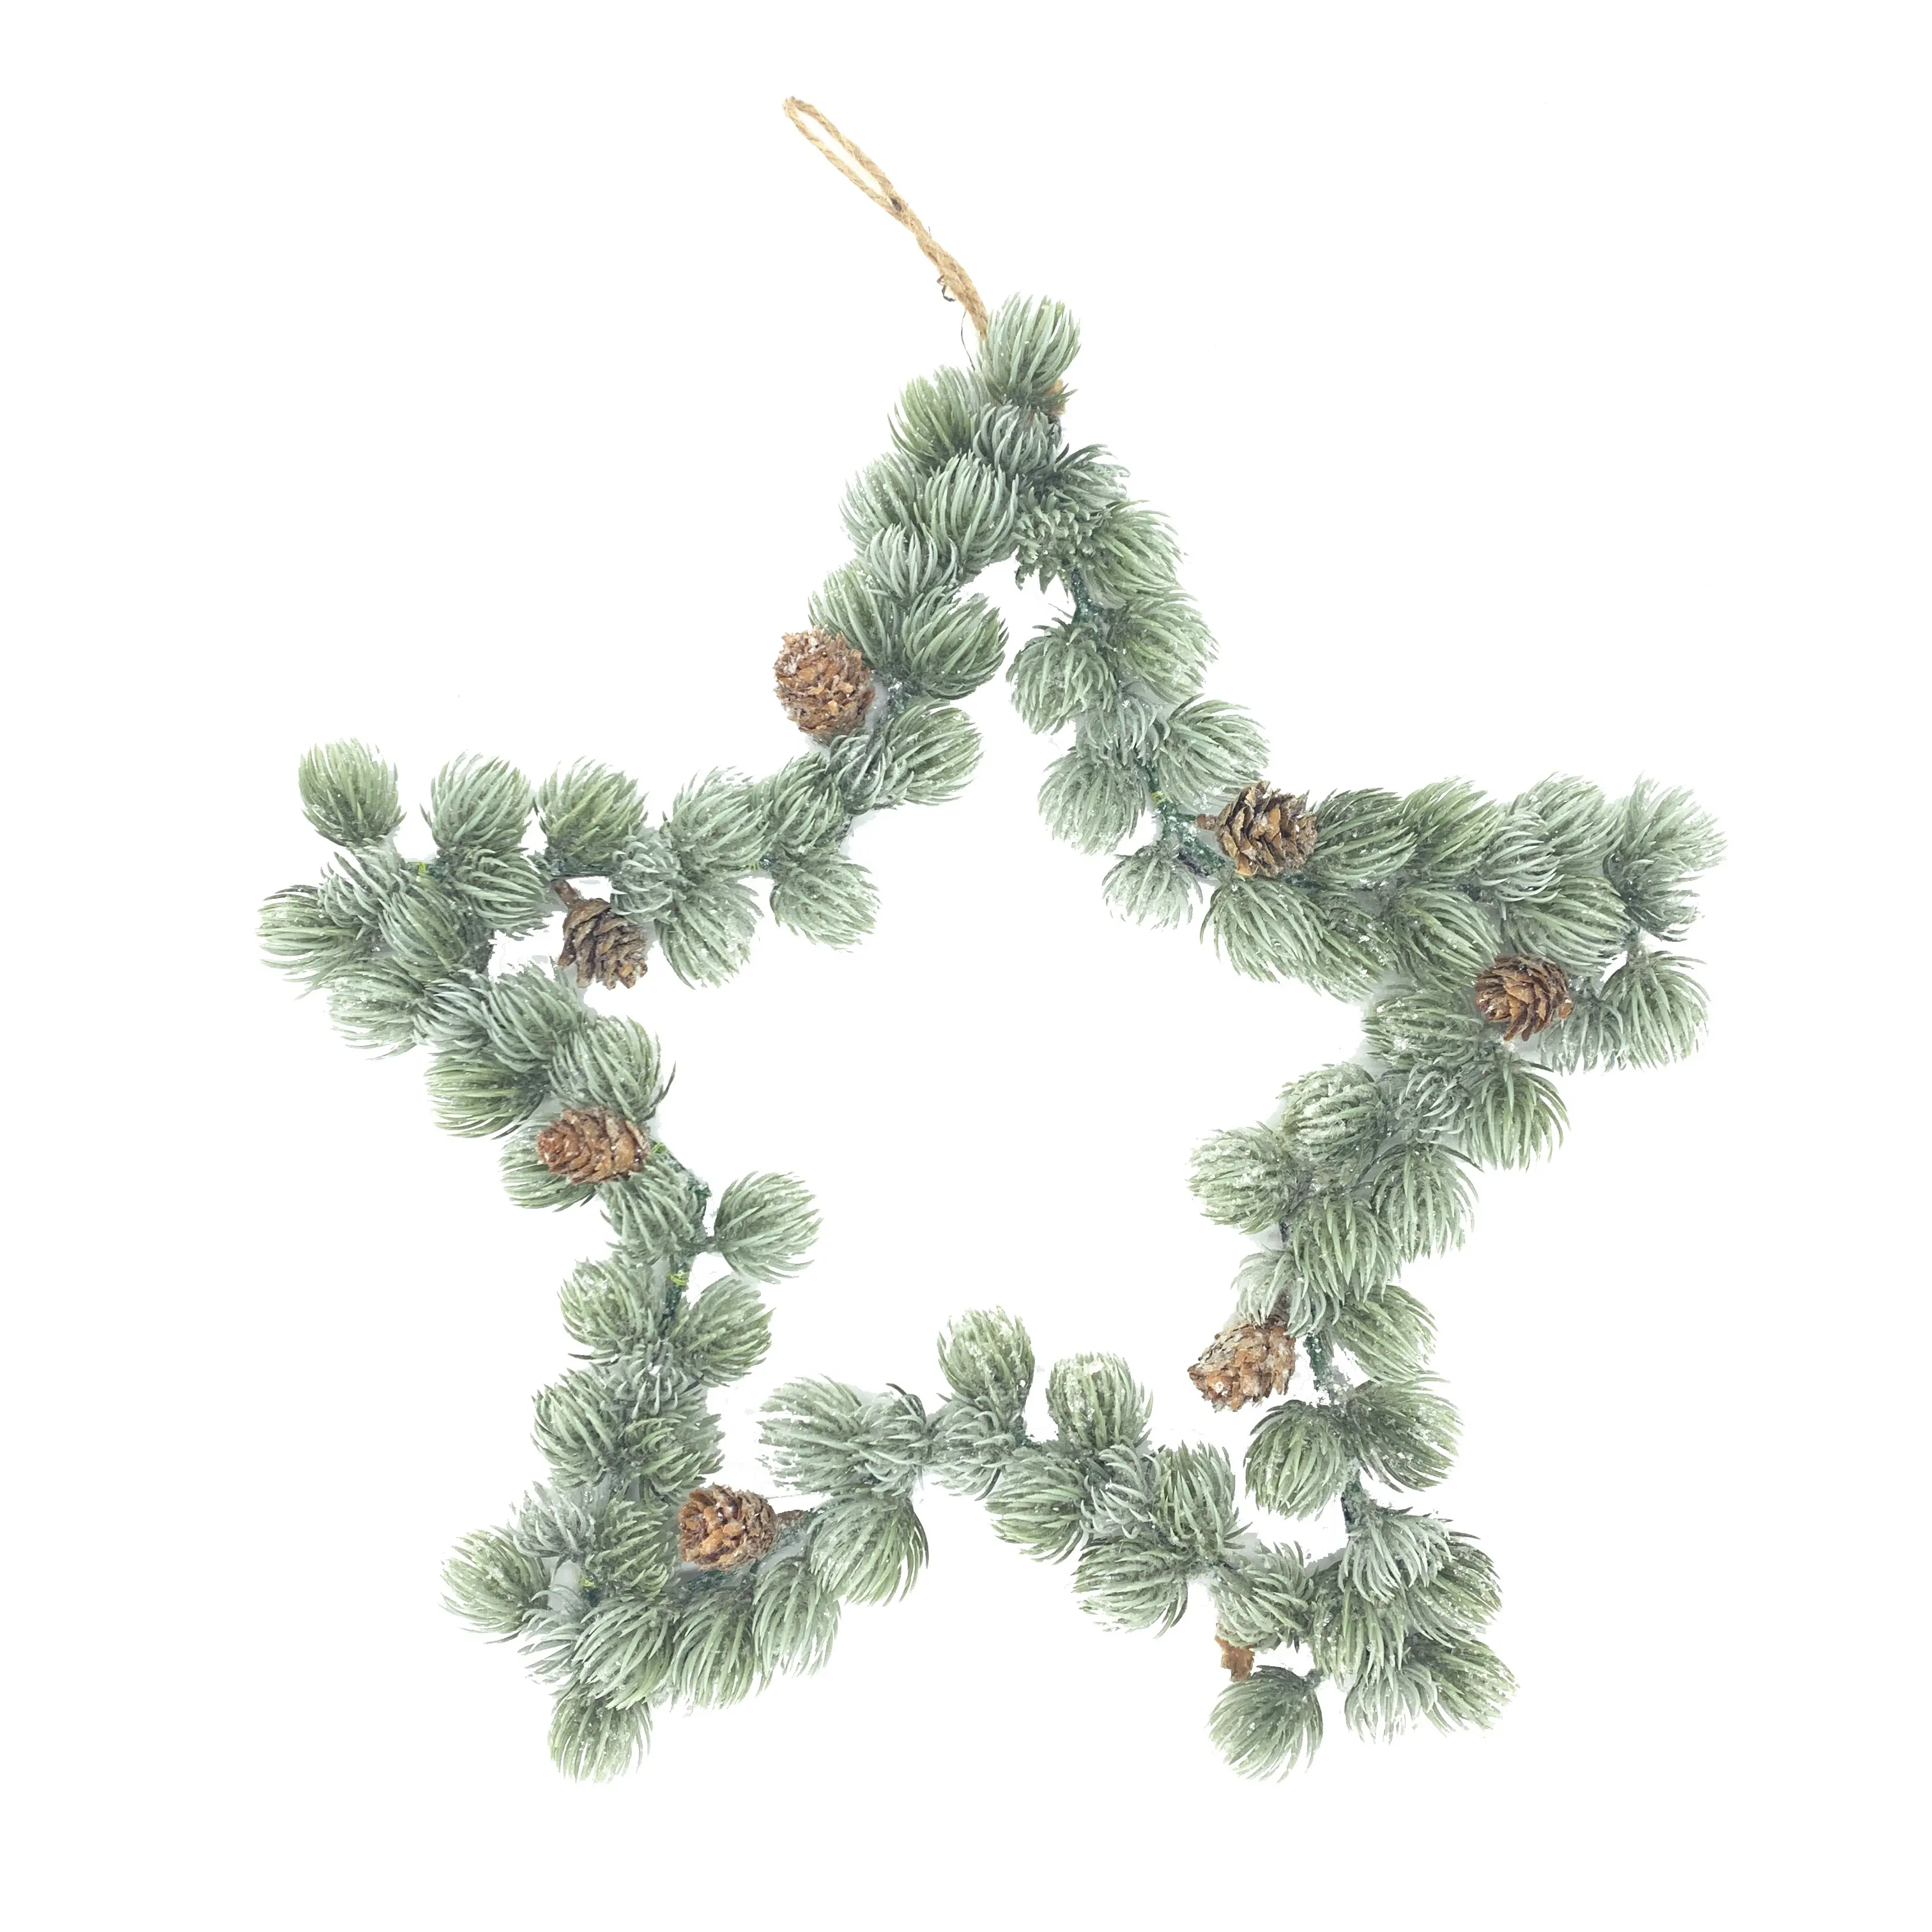 creative PE grey-green Heavy Snow front door star shape Xmas wreaths clear lights Party baby room home decoration